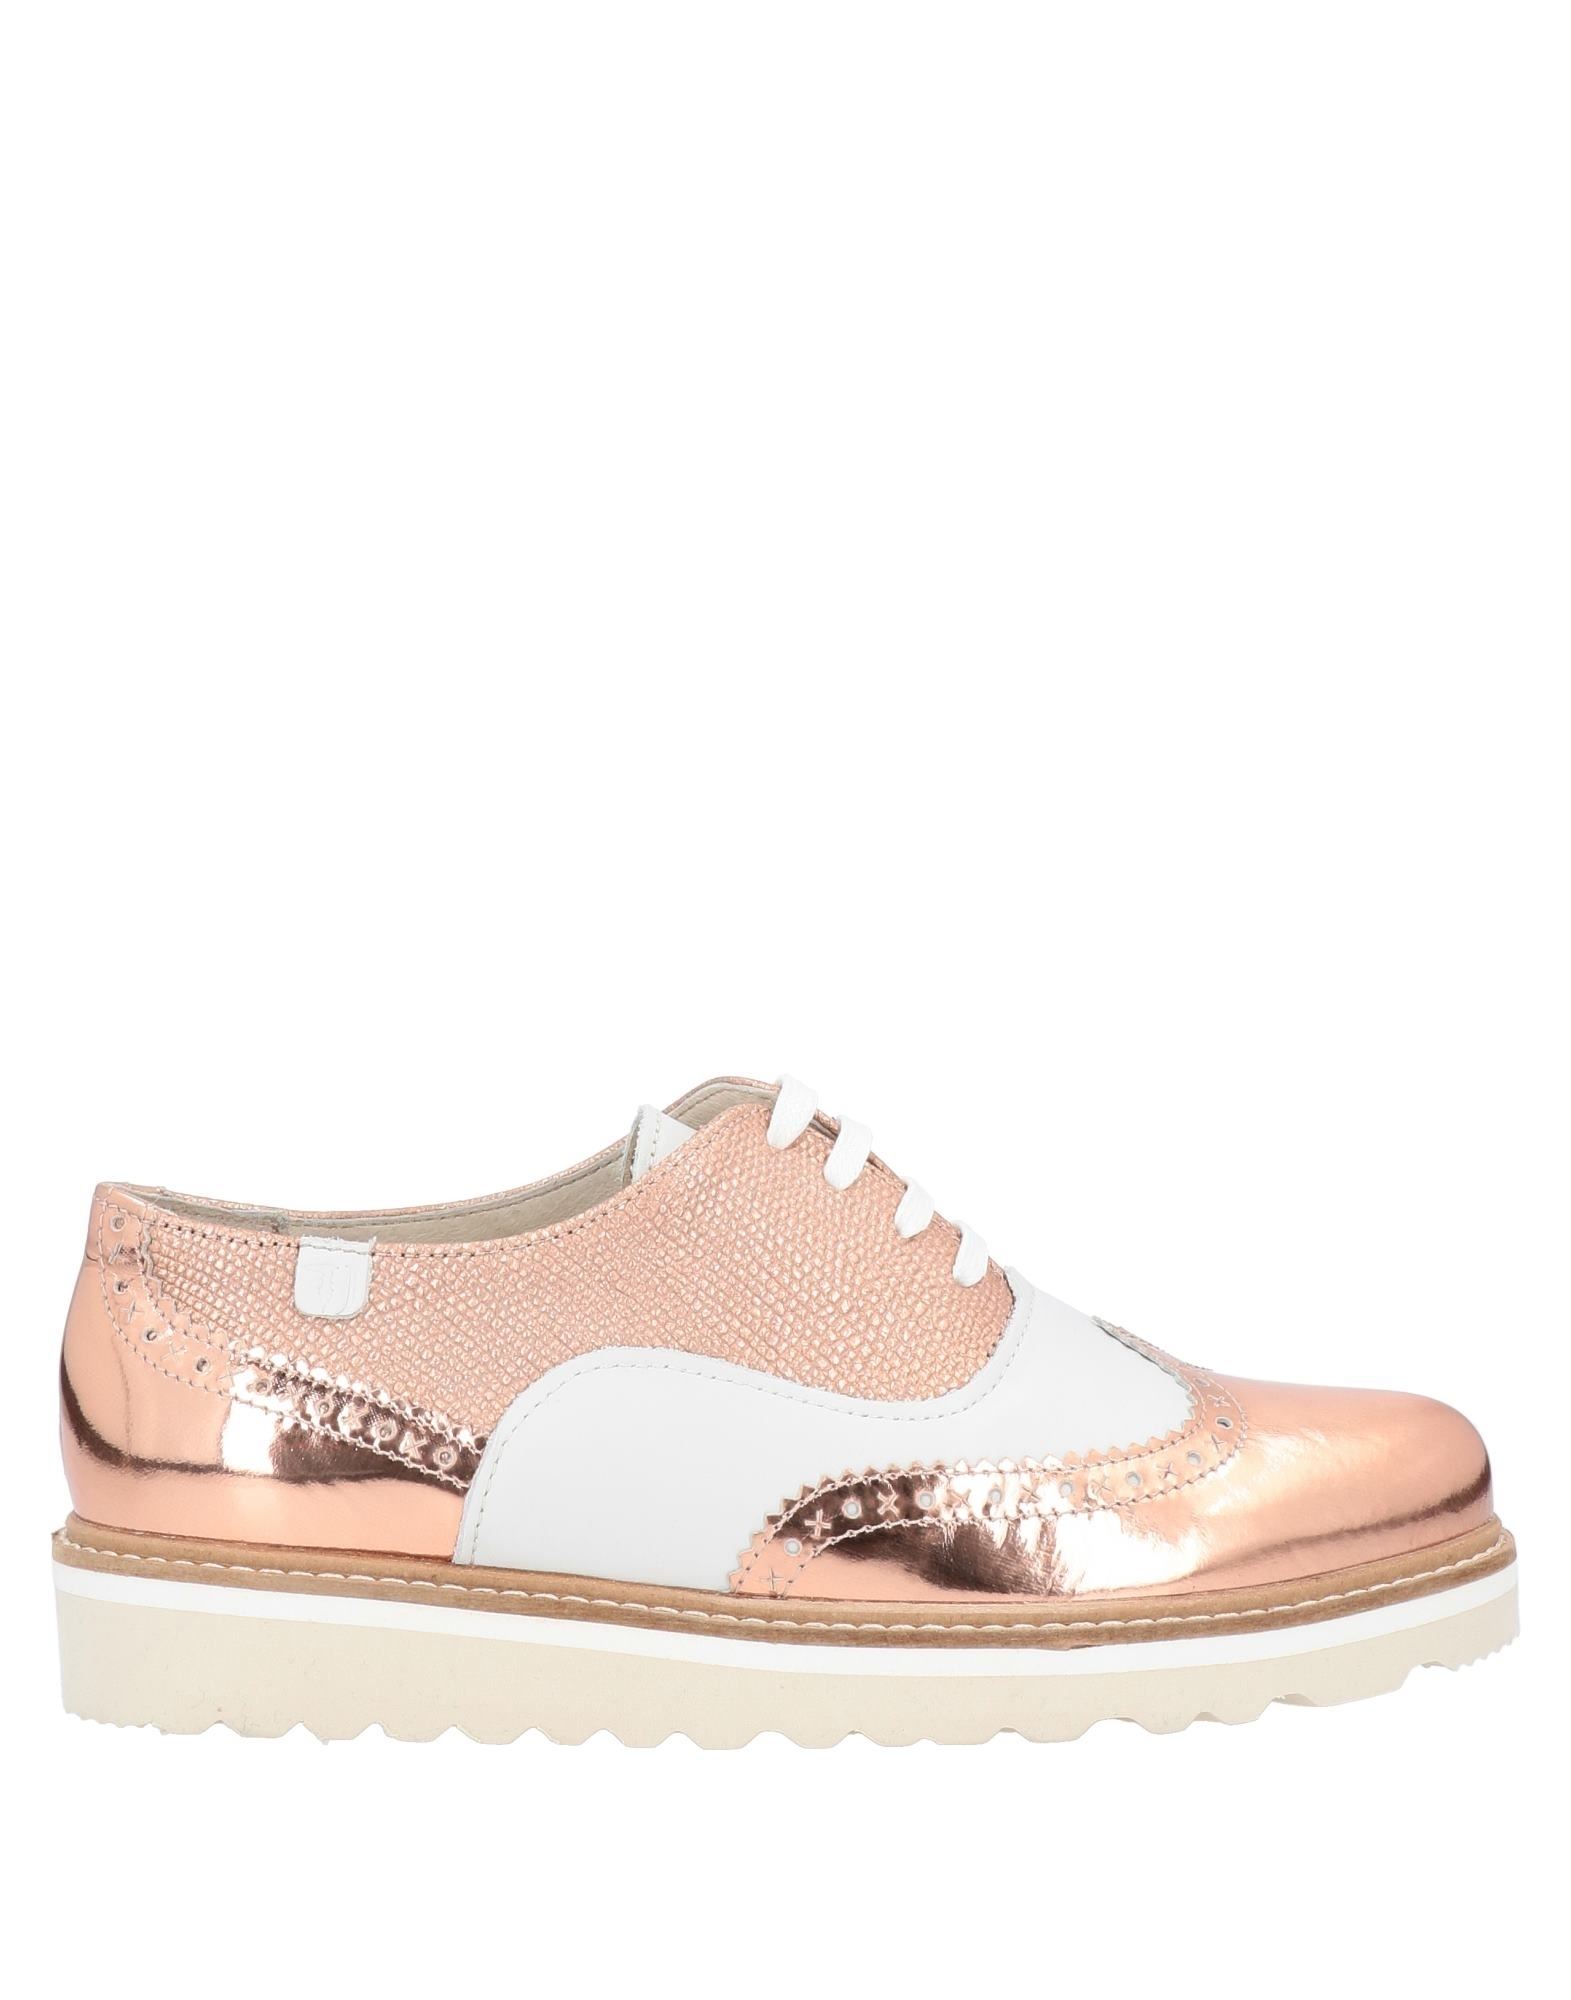 Trussardi Jeans Lace-up Shoes In Rose Gold